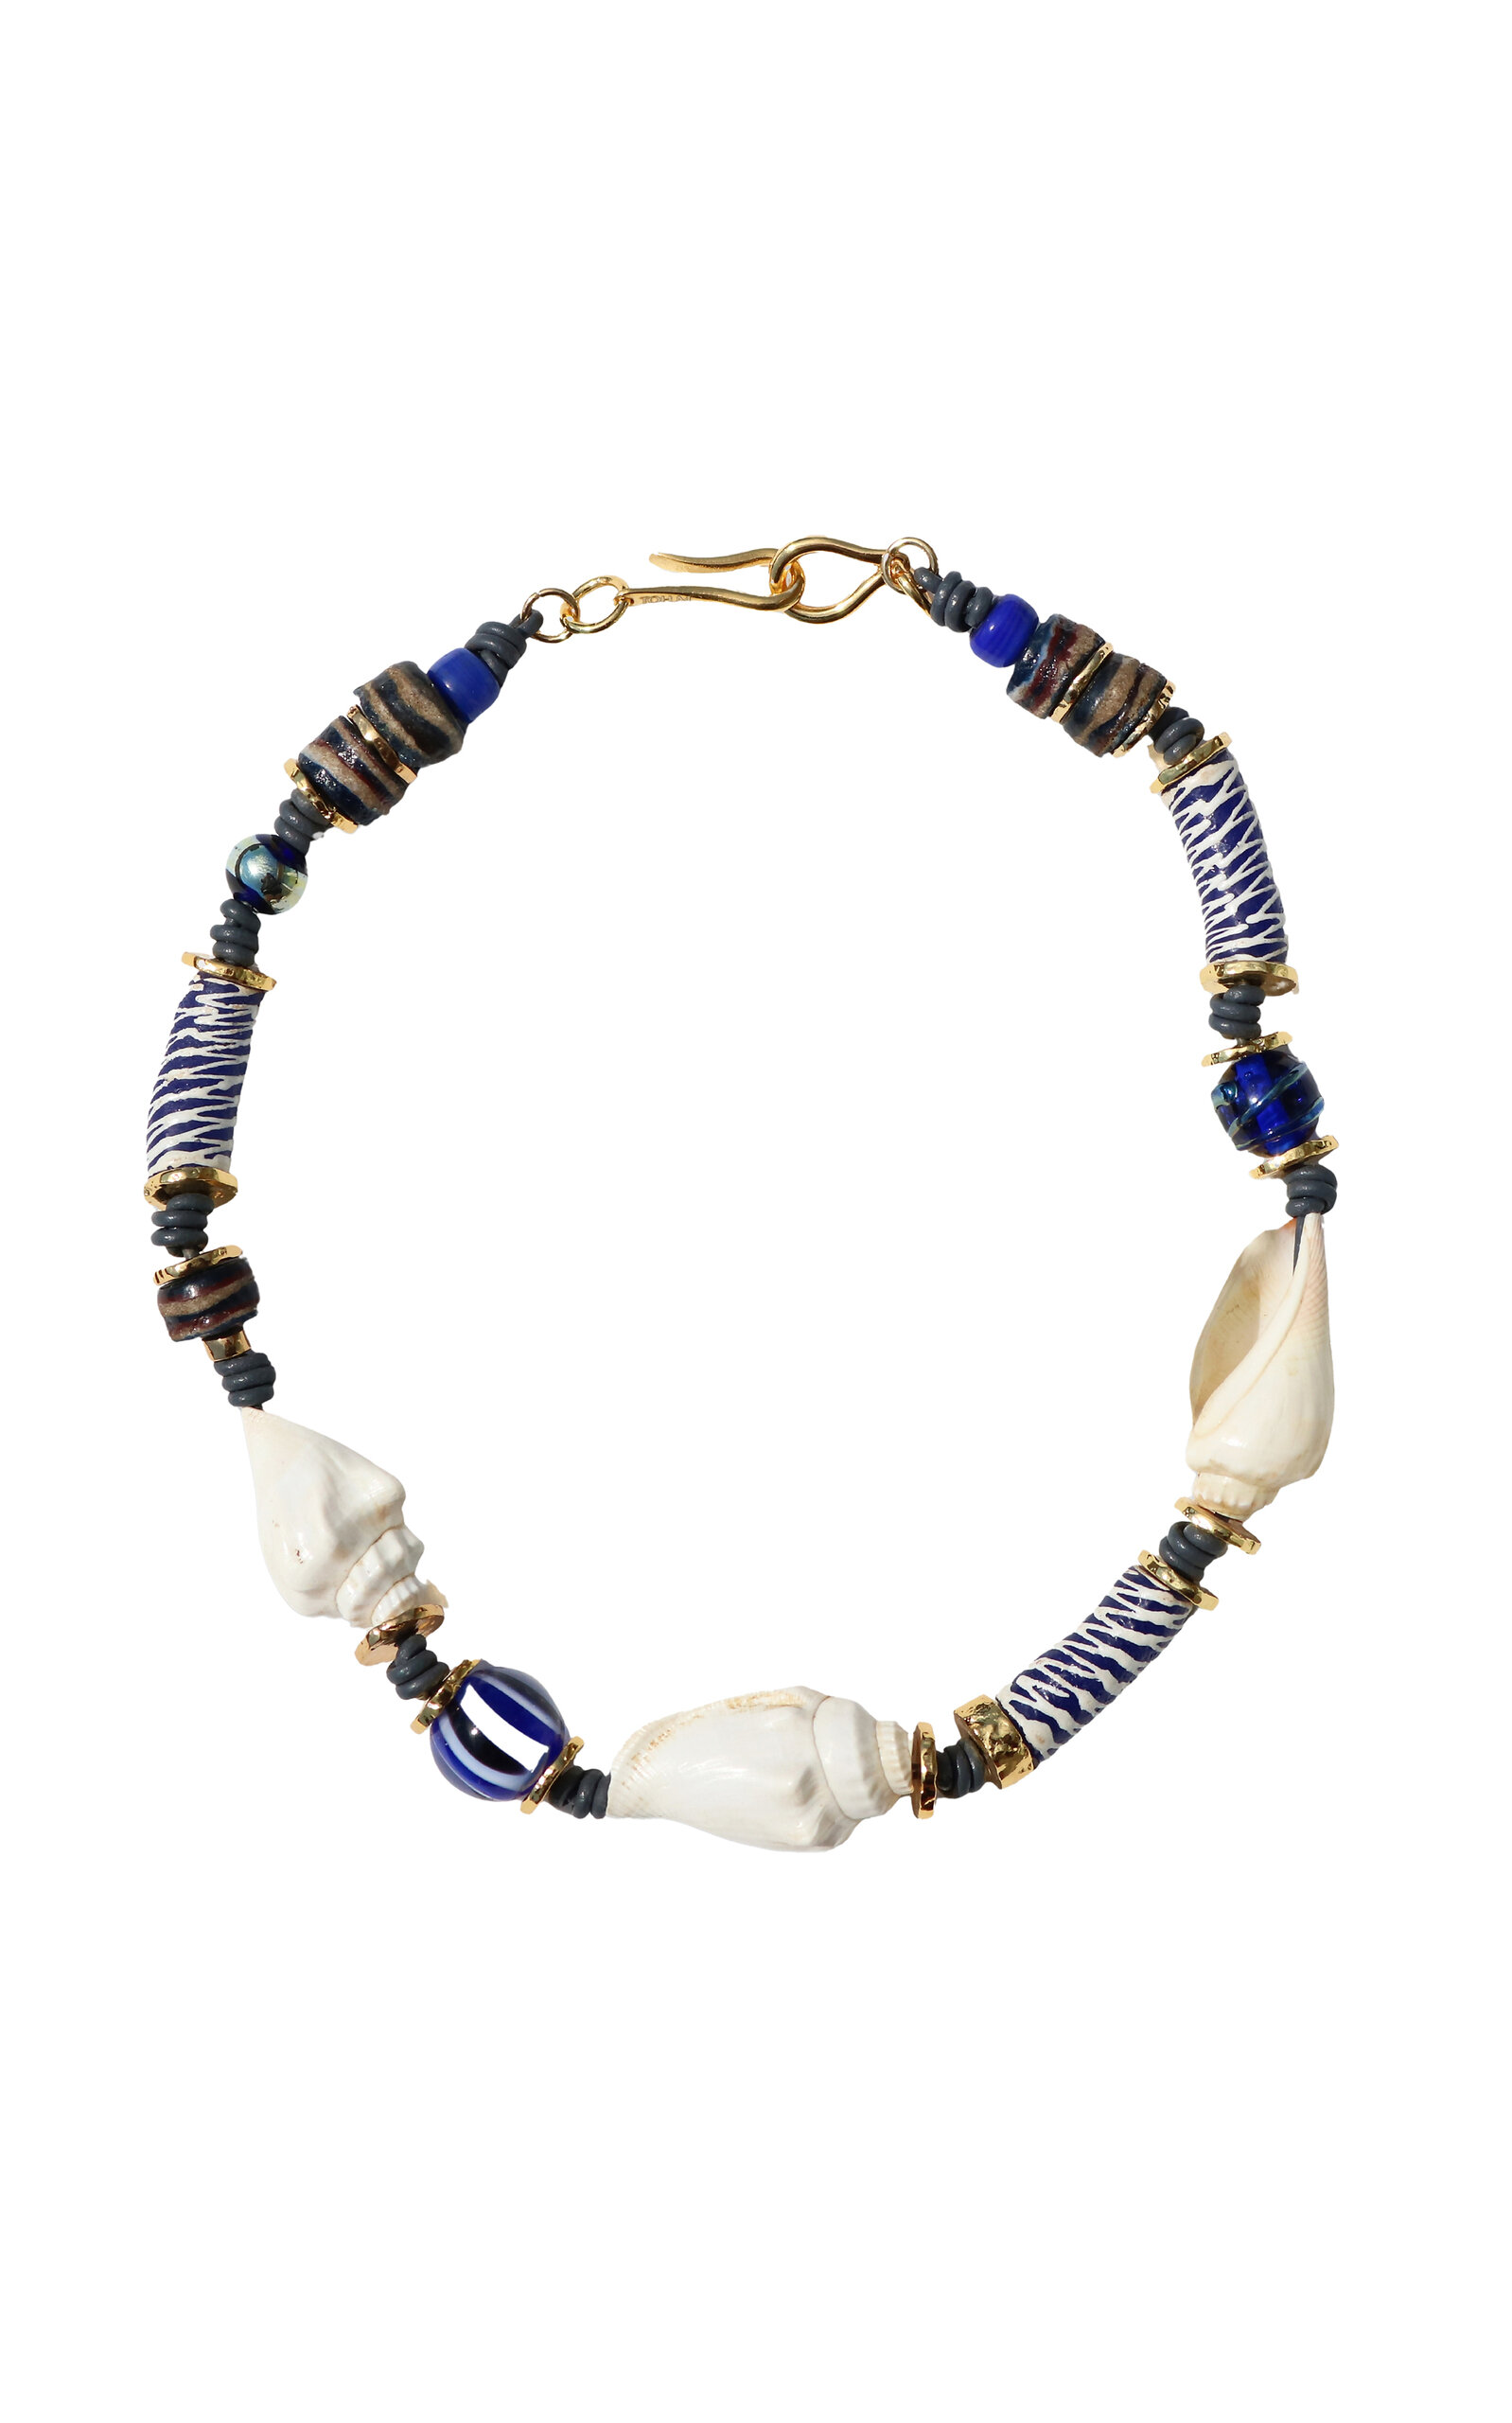 Samsara Vintage Beads and Shell Necklace